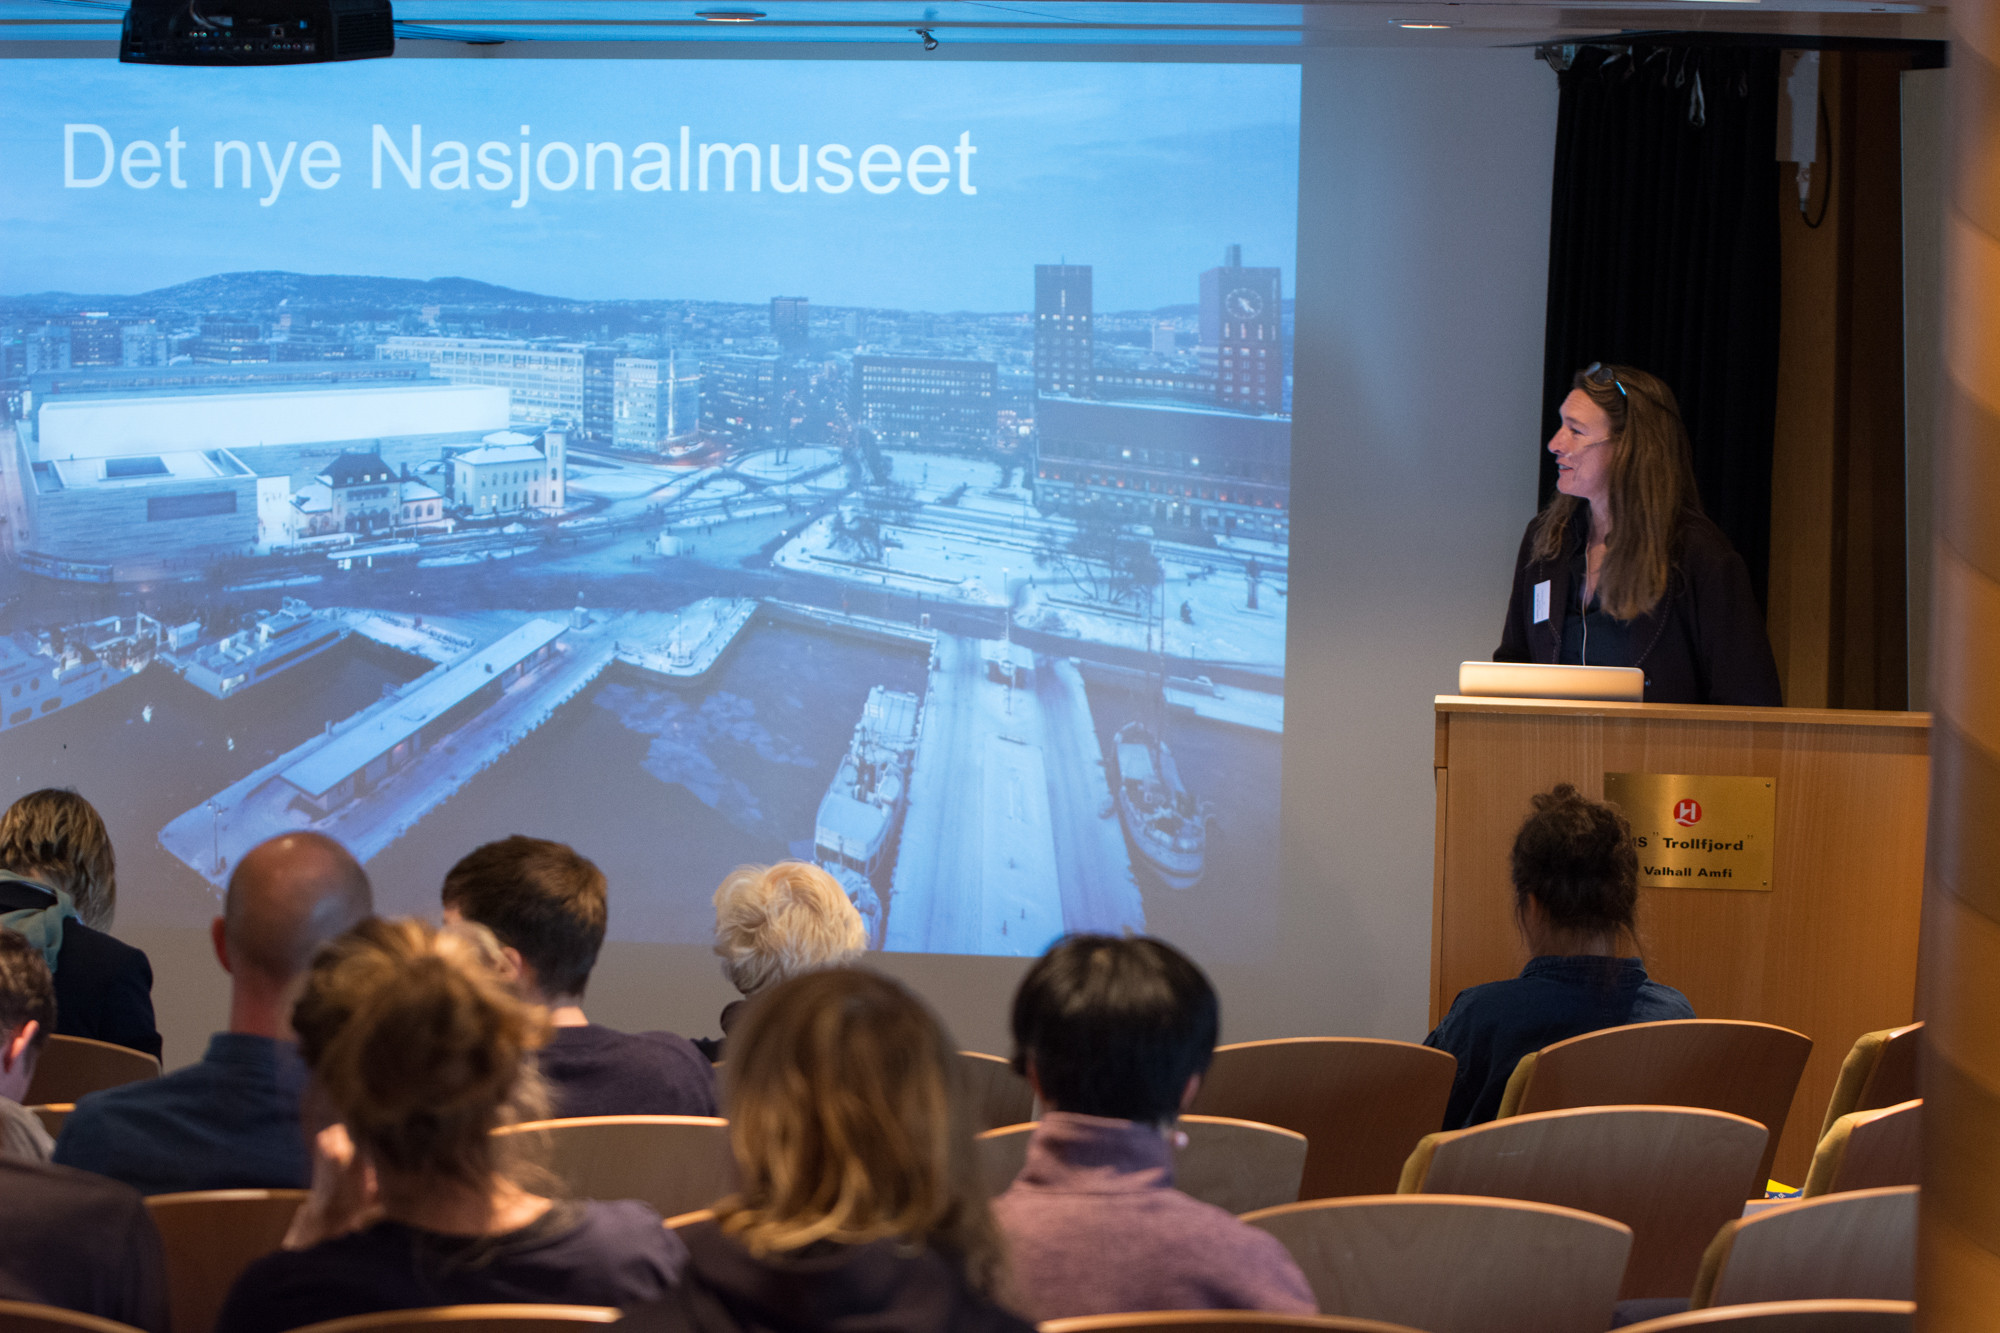 Sabrina van der Ley, Director of the Museum of Contemporary Art presenting the new National Museum. Photo: Laimonas Puisys.